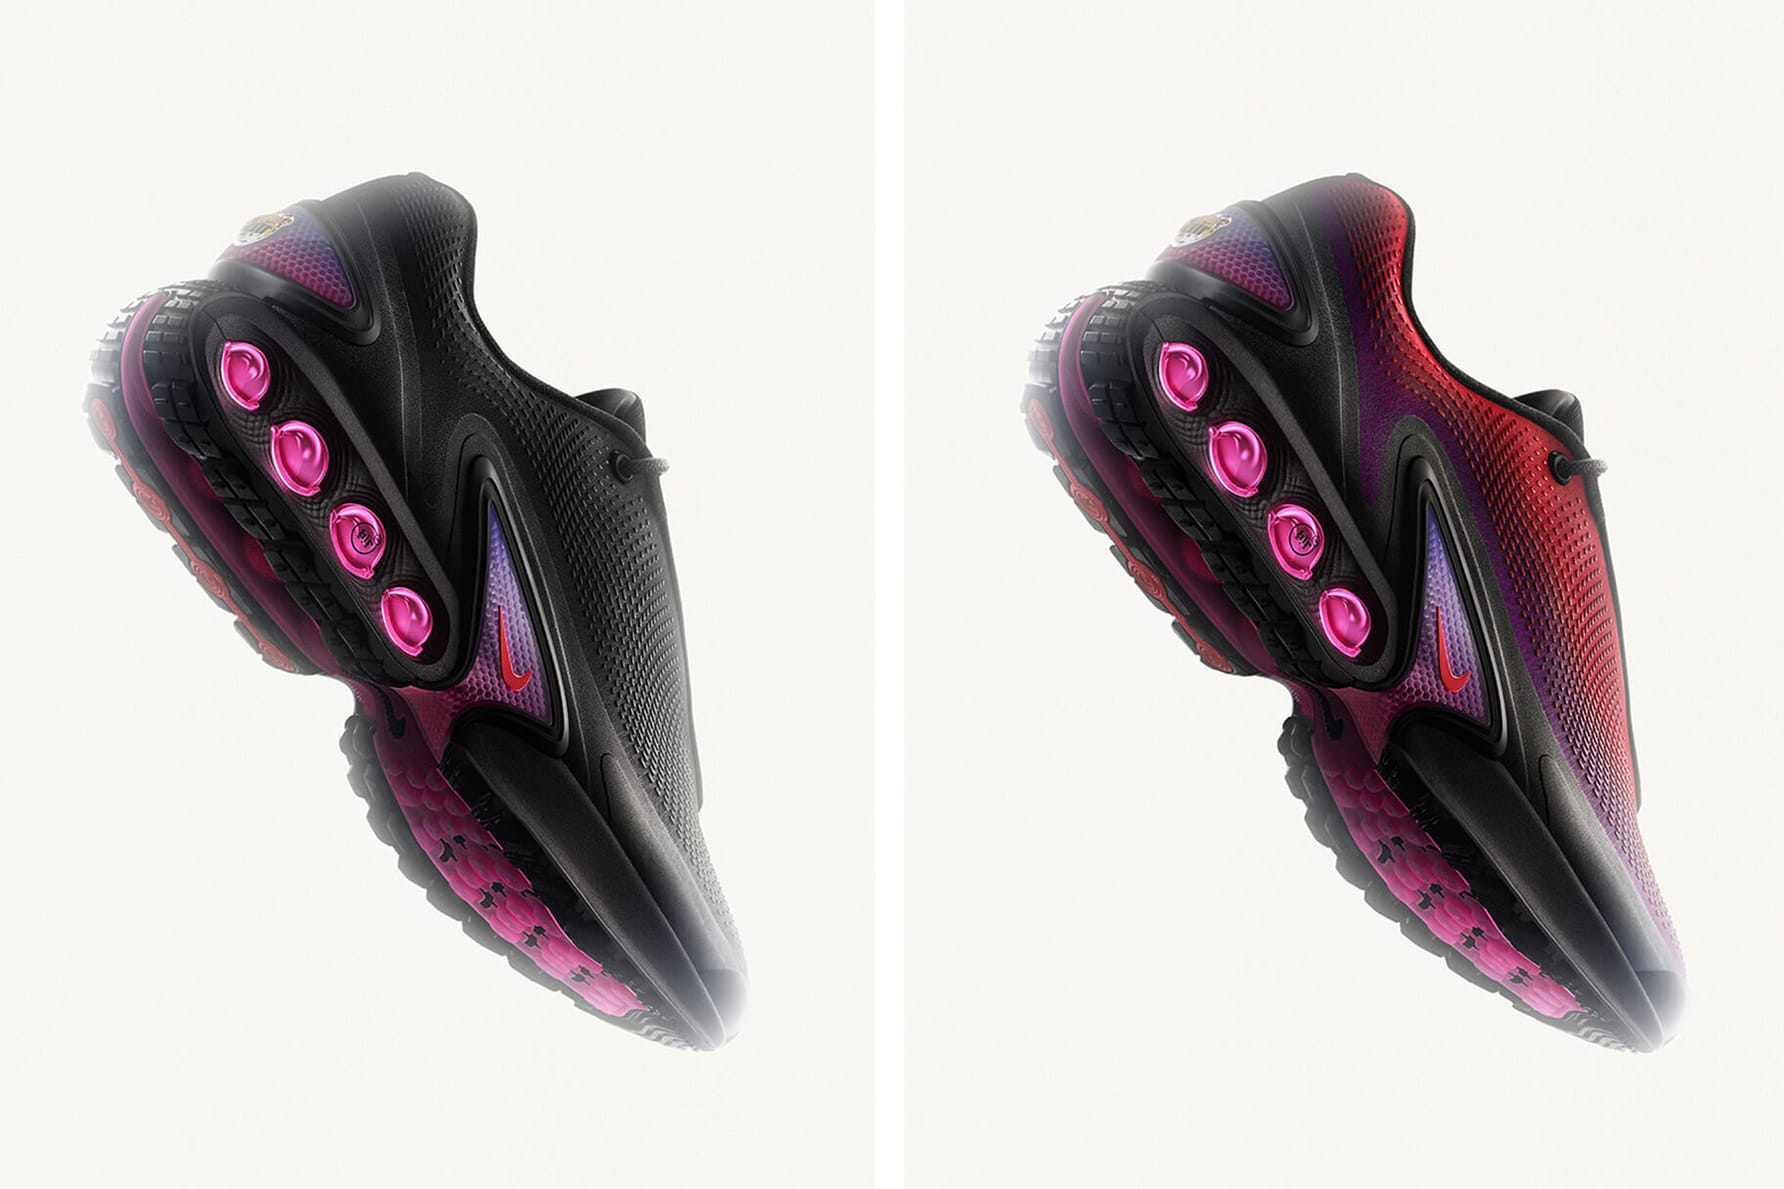 Nike Debuts Groundbreaking Technology With Launch of Air Max Dn Shoe 